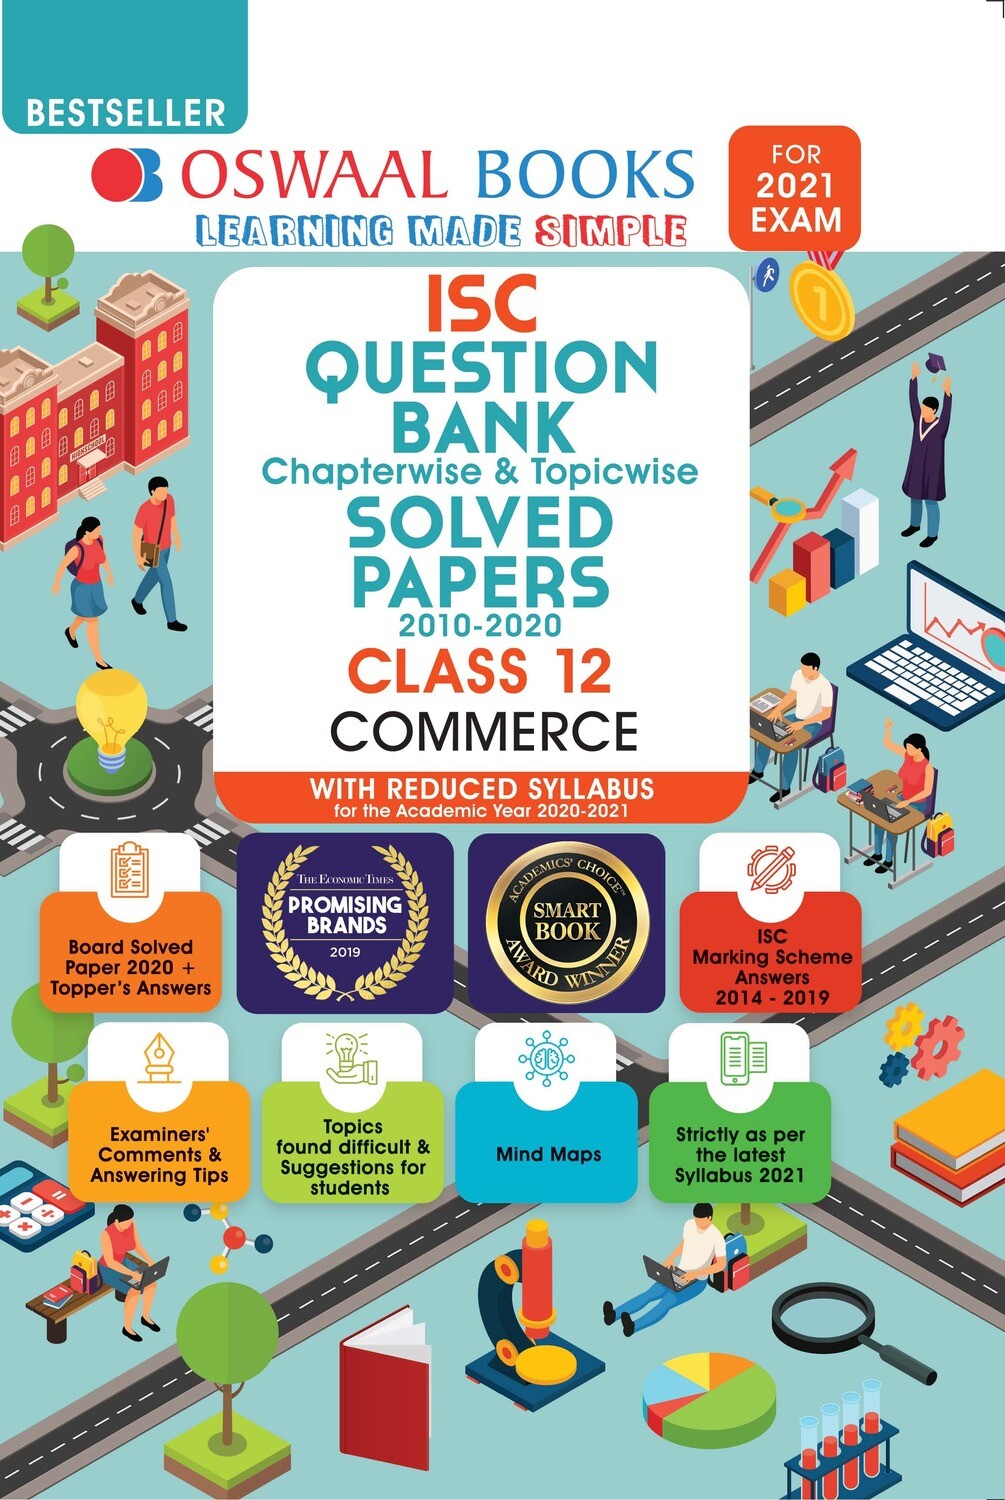 Buy e-book: Oswaal ISC Question Bank Chapterwise & Topicwise Solved Papers, Commerce, Class 12 (Reduced Syllabus